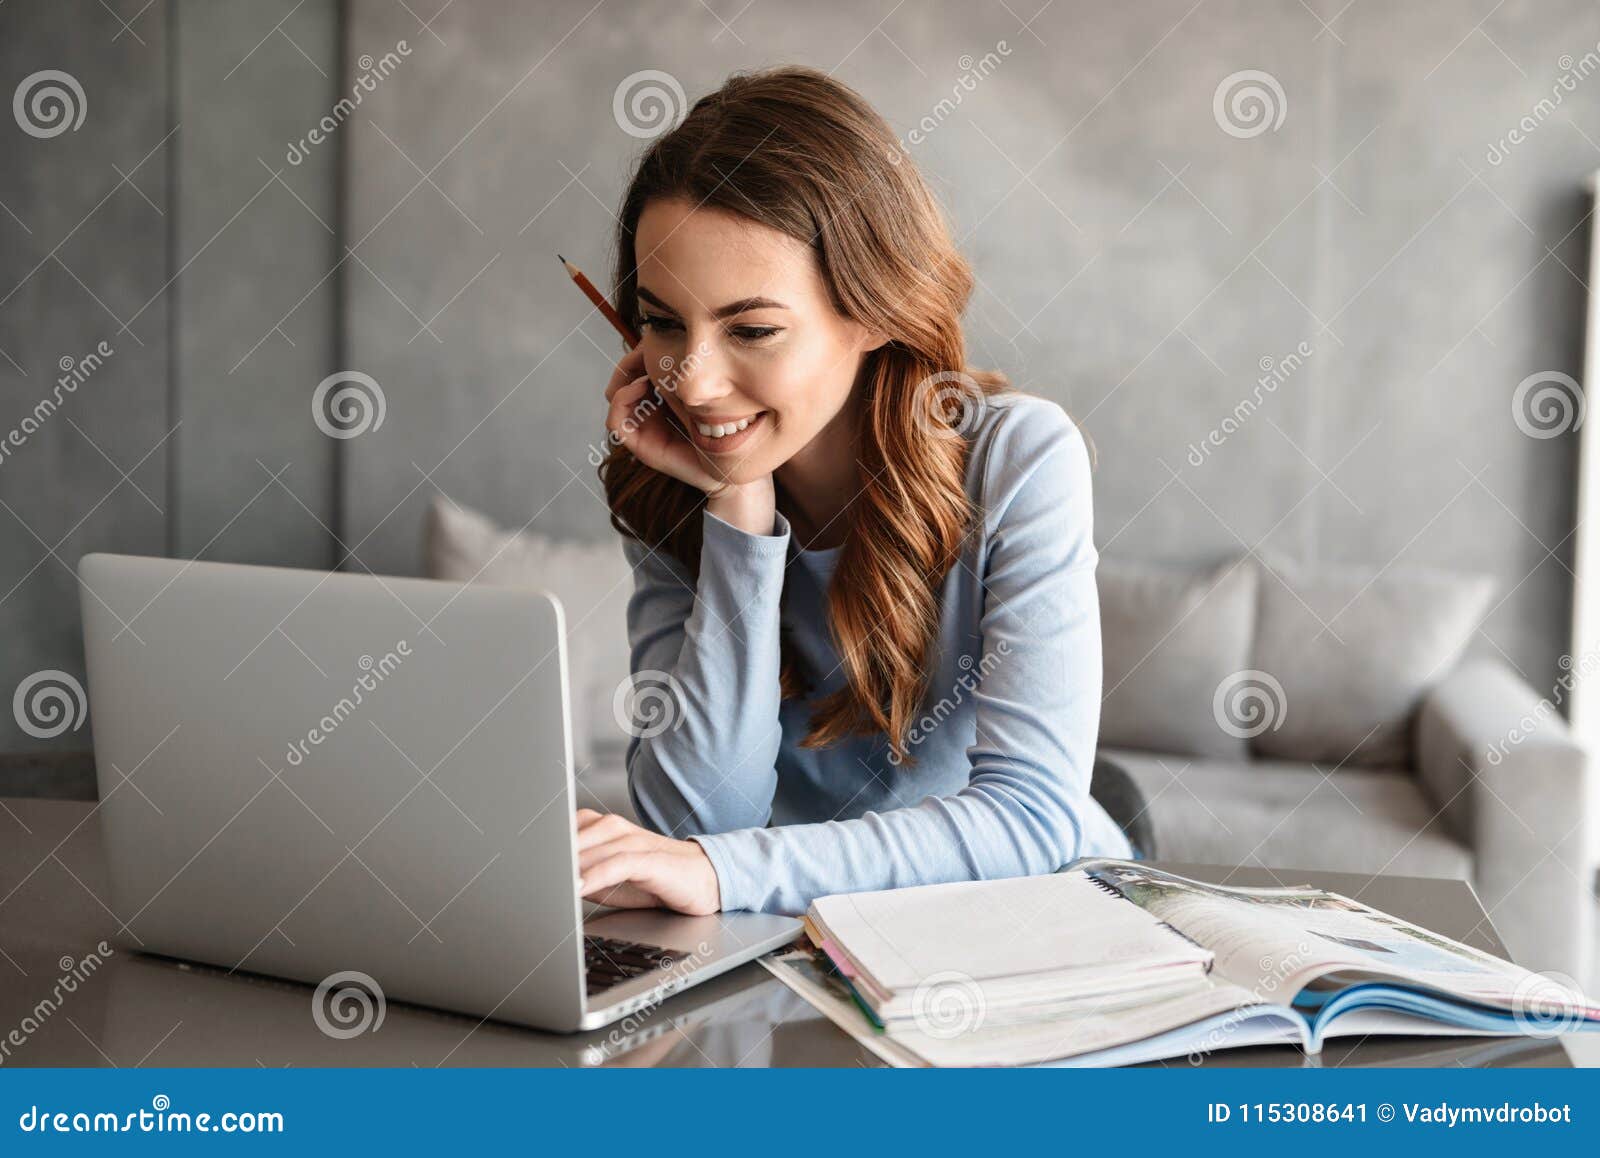 portrait of a beautiful young woman studying